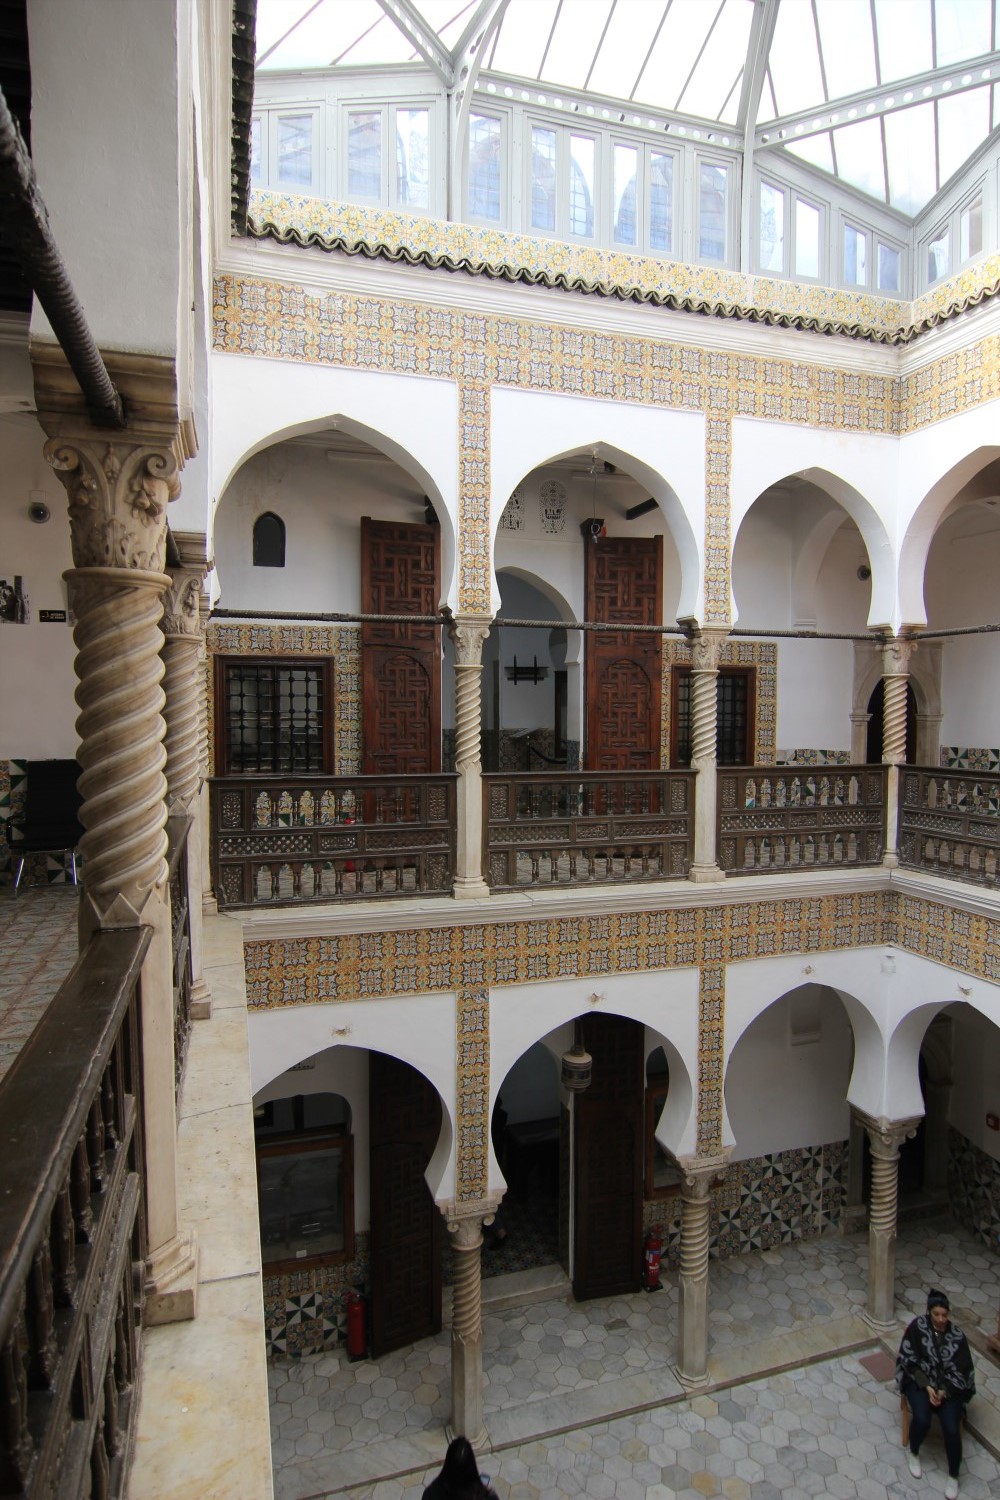 View of the south side of the courtyard from the second level